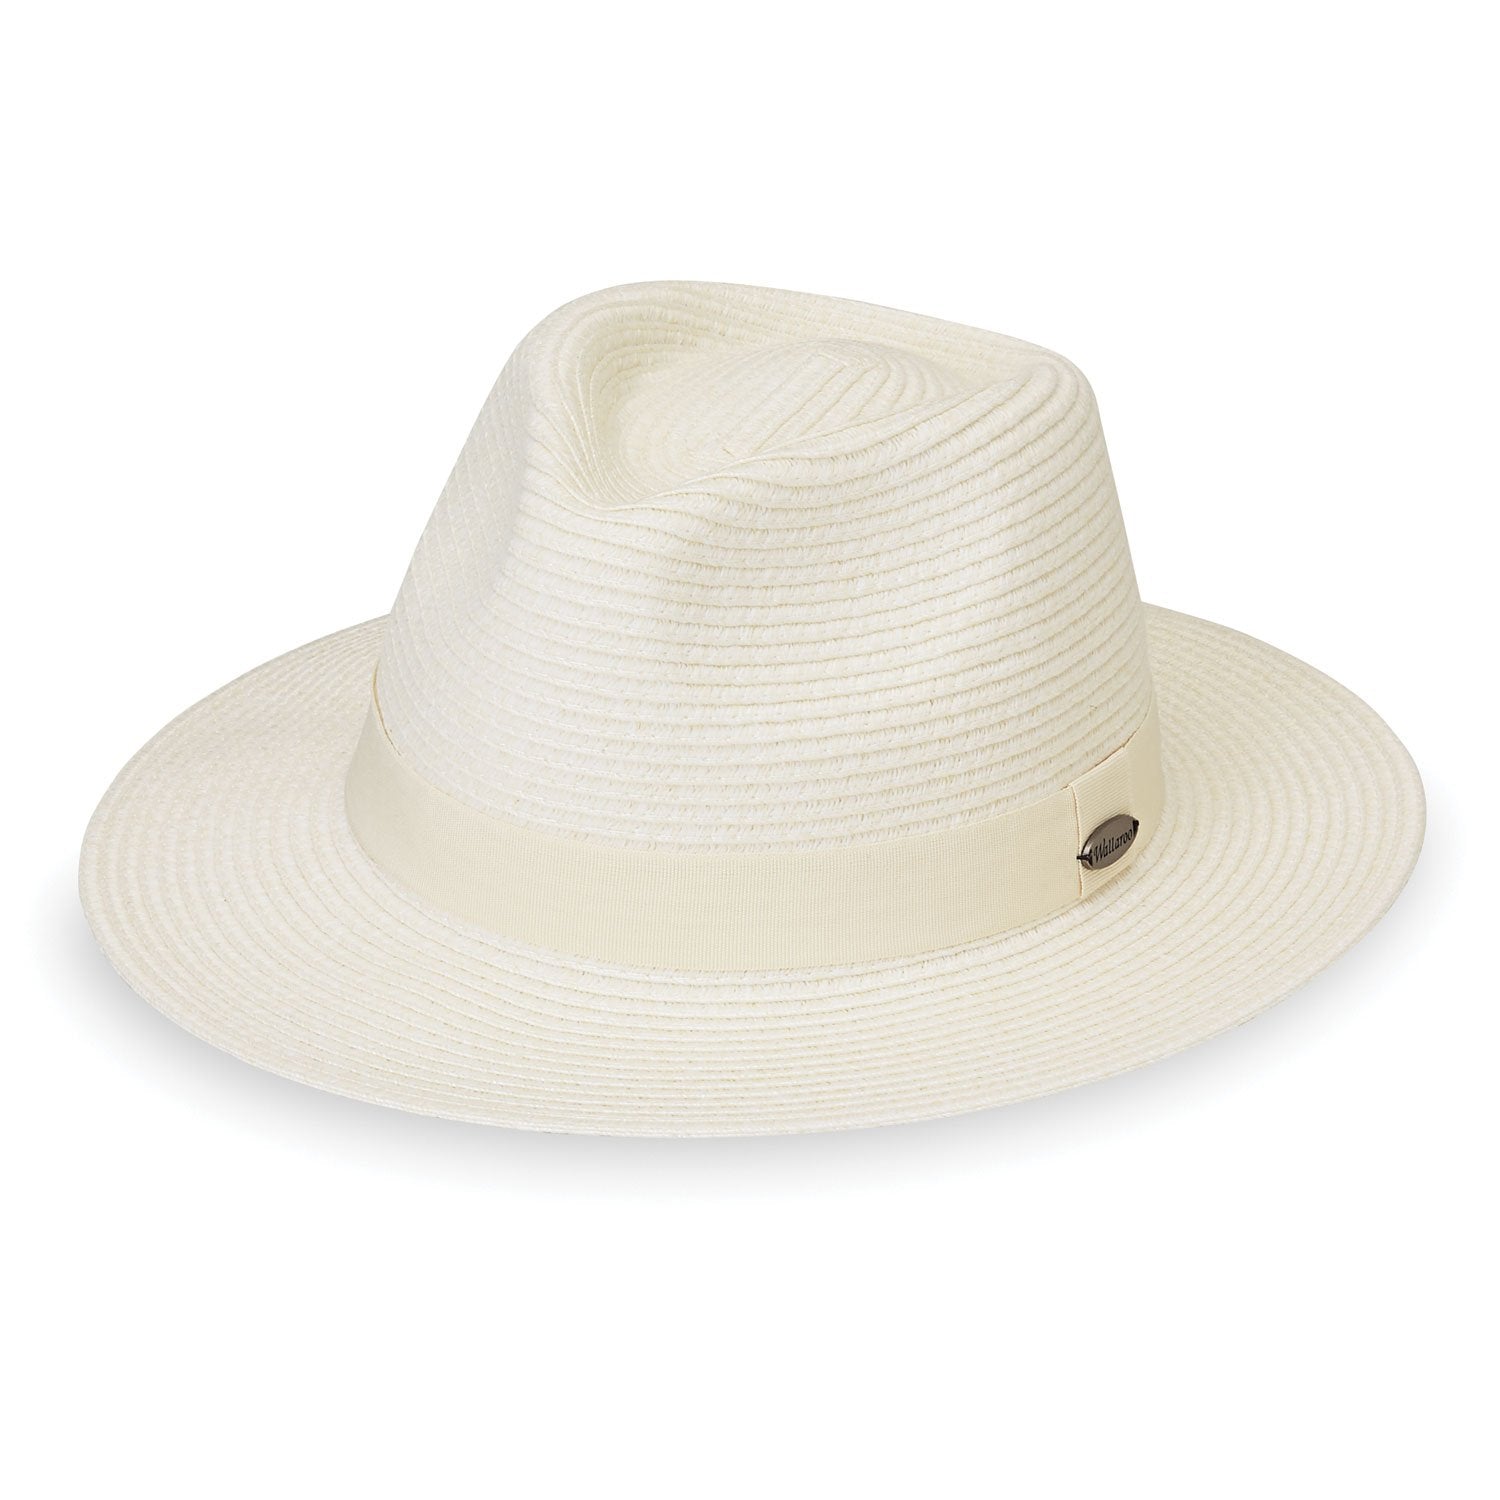 Featuring Front of Packable UPF Women's Fedora Style Caroline Sun Hat in Ivory from Wallaroo